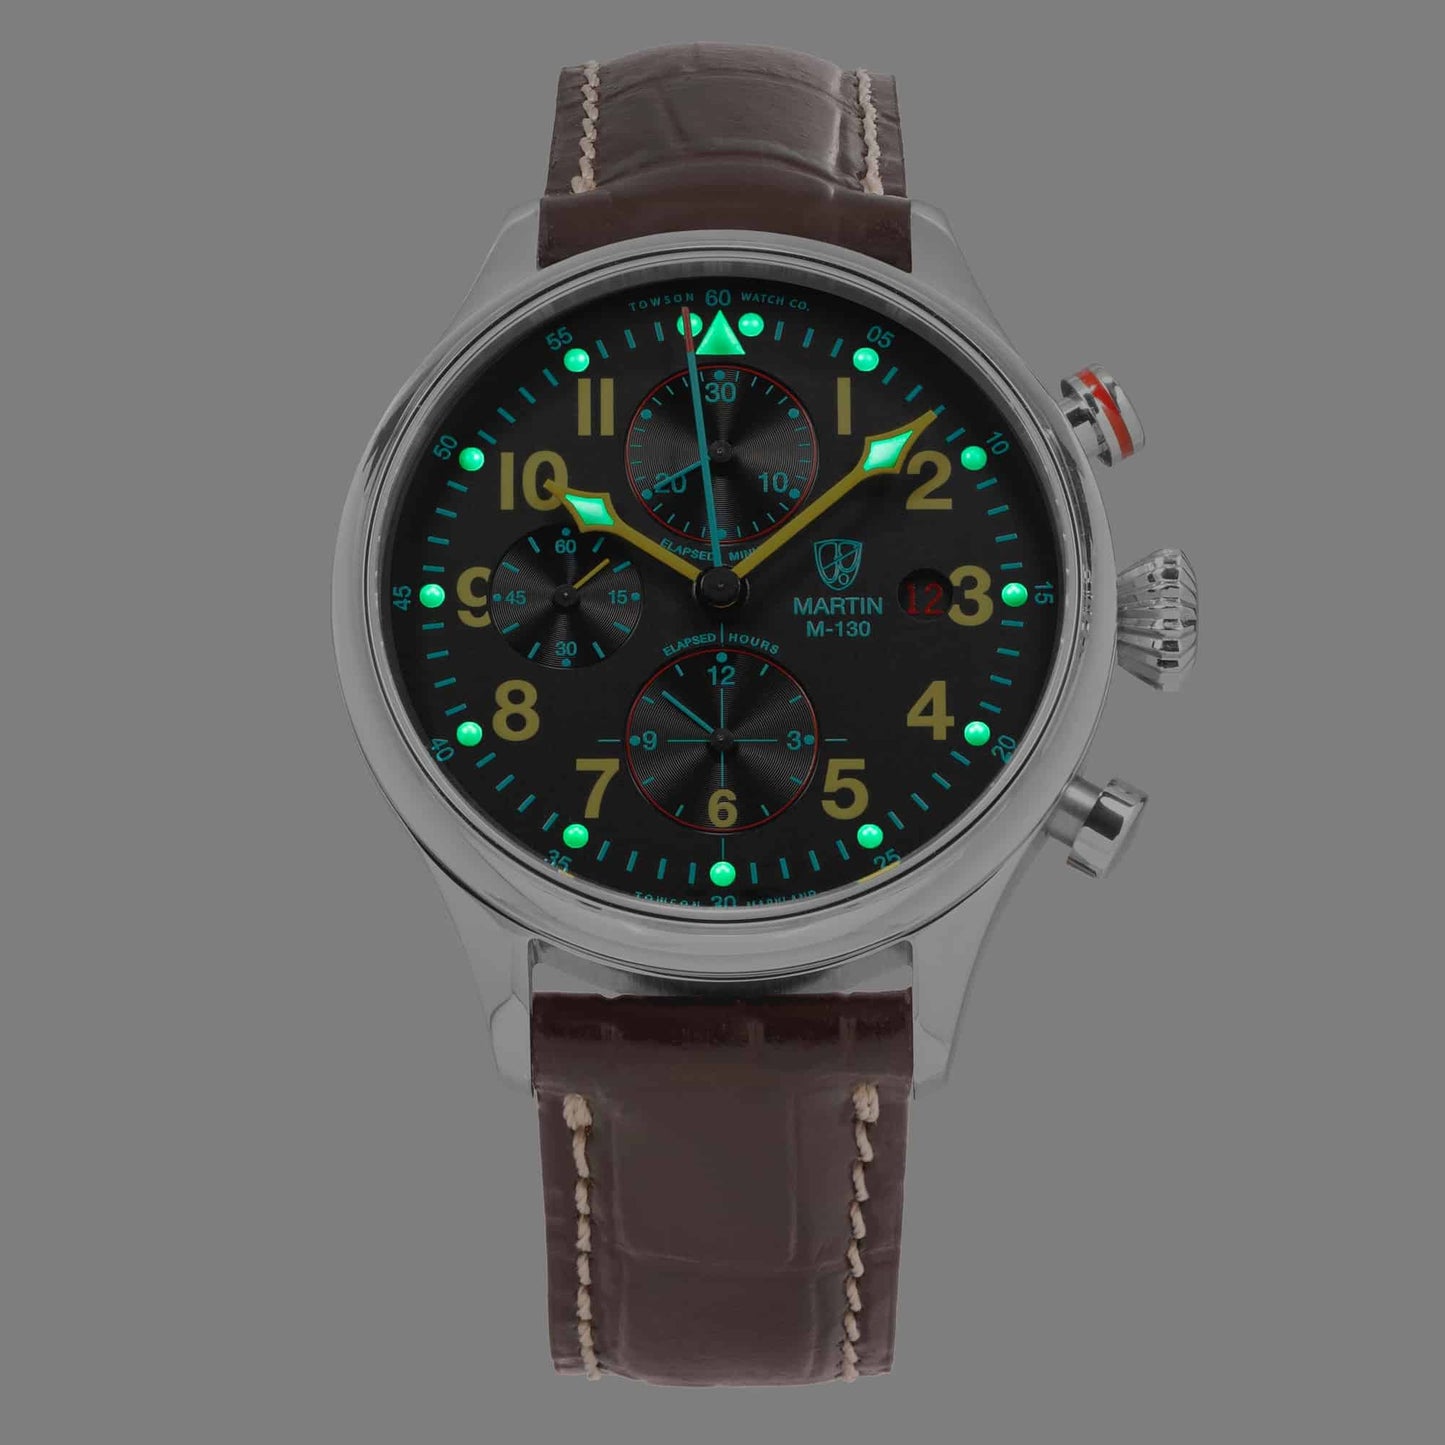 Towson Watch Company MARTIN M-130 - Limited Collection - Maple City Timepieces